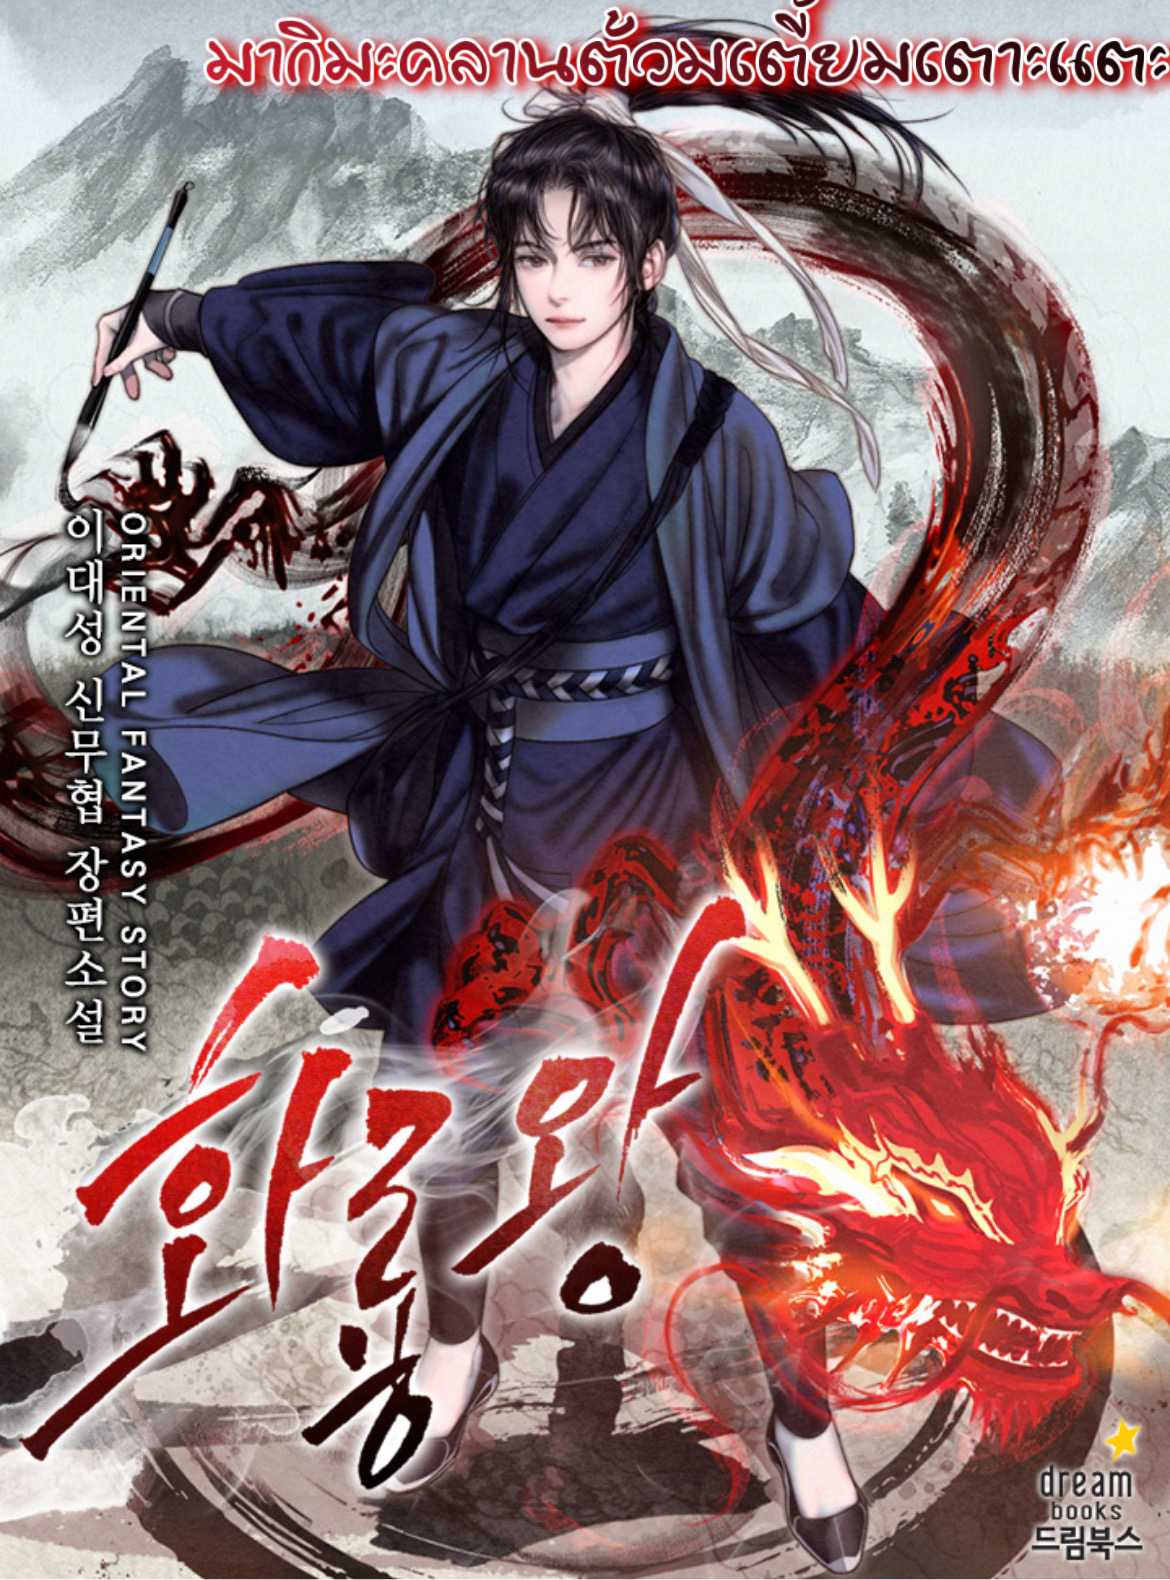 King of Fire Dragon 13 07